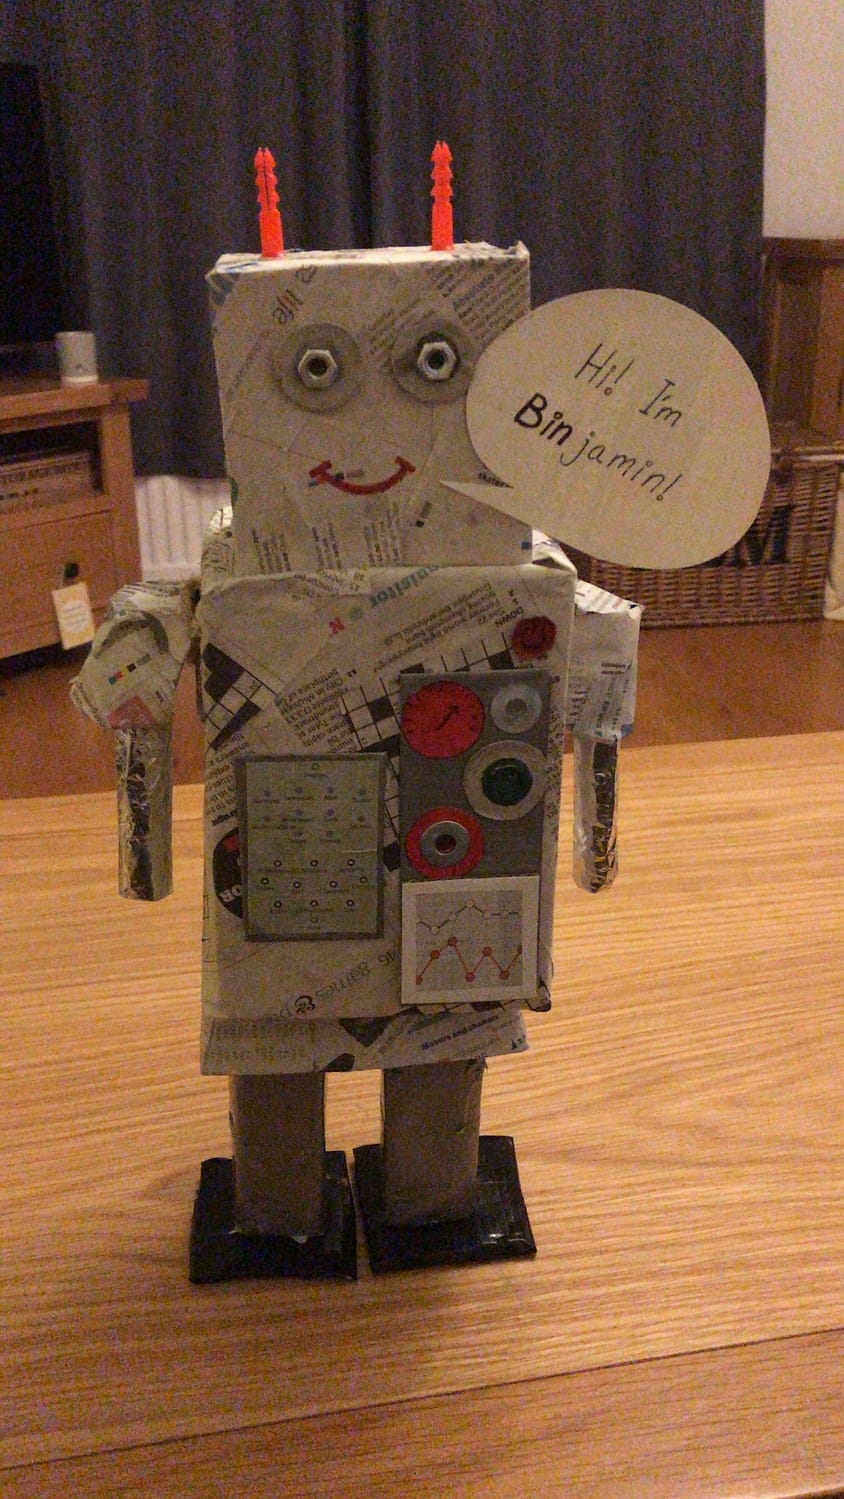 A robot made from recycled items found around the house